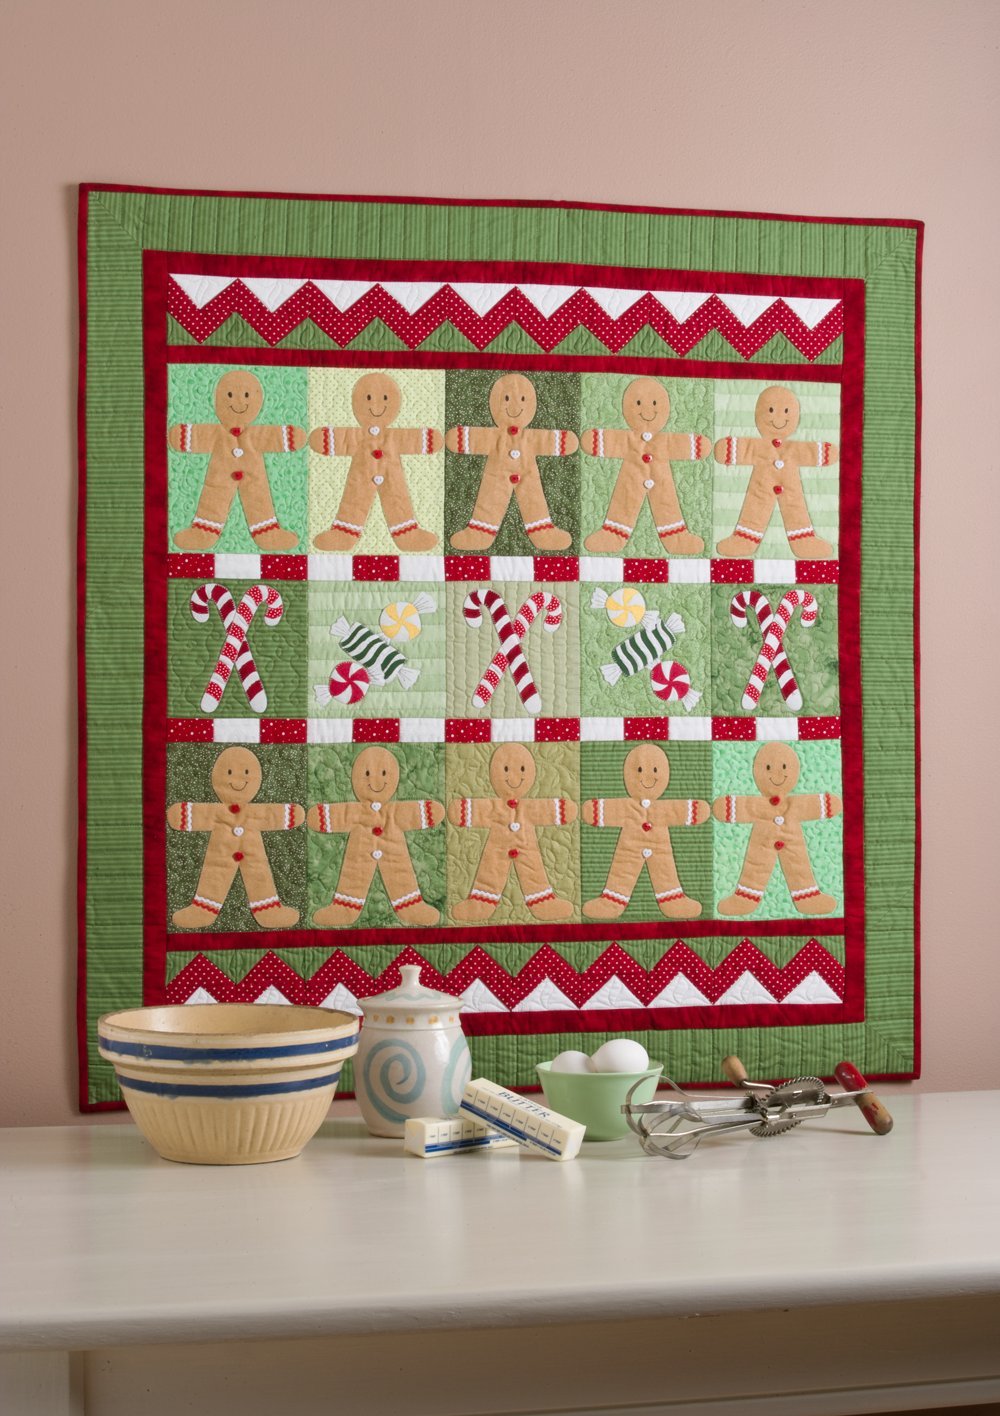 10+ Christmas Quilt Patterns and Books: These adorable Christmas sewing patterns and books are perfect to get you in the holiday spirit! Start your Christmas sewing now. Click through to see the entire list of patterns and books. www.sewwhatalicia.com